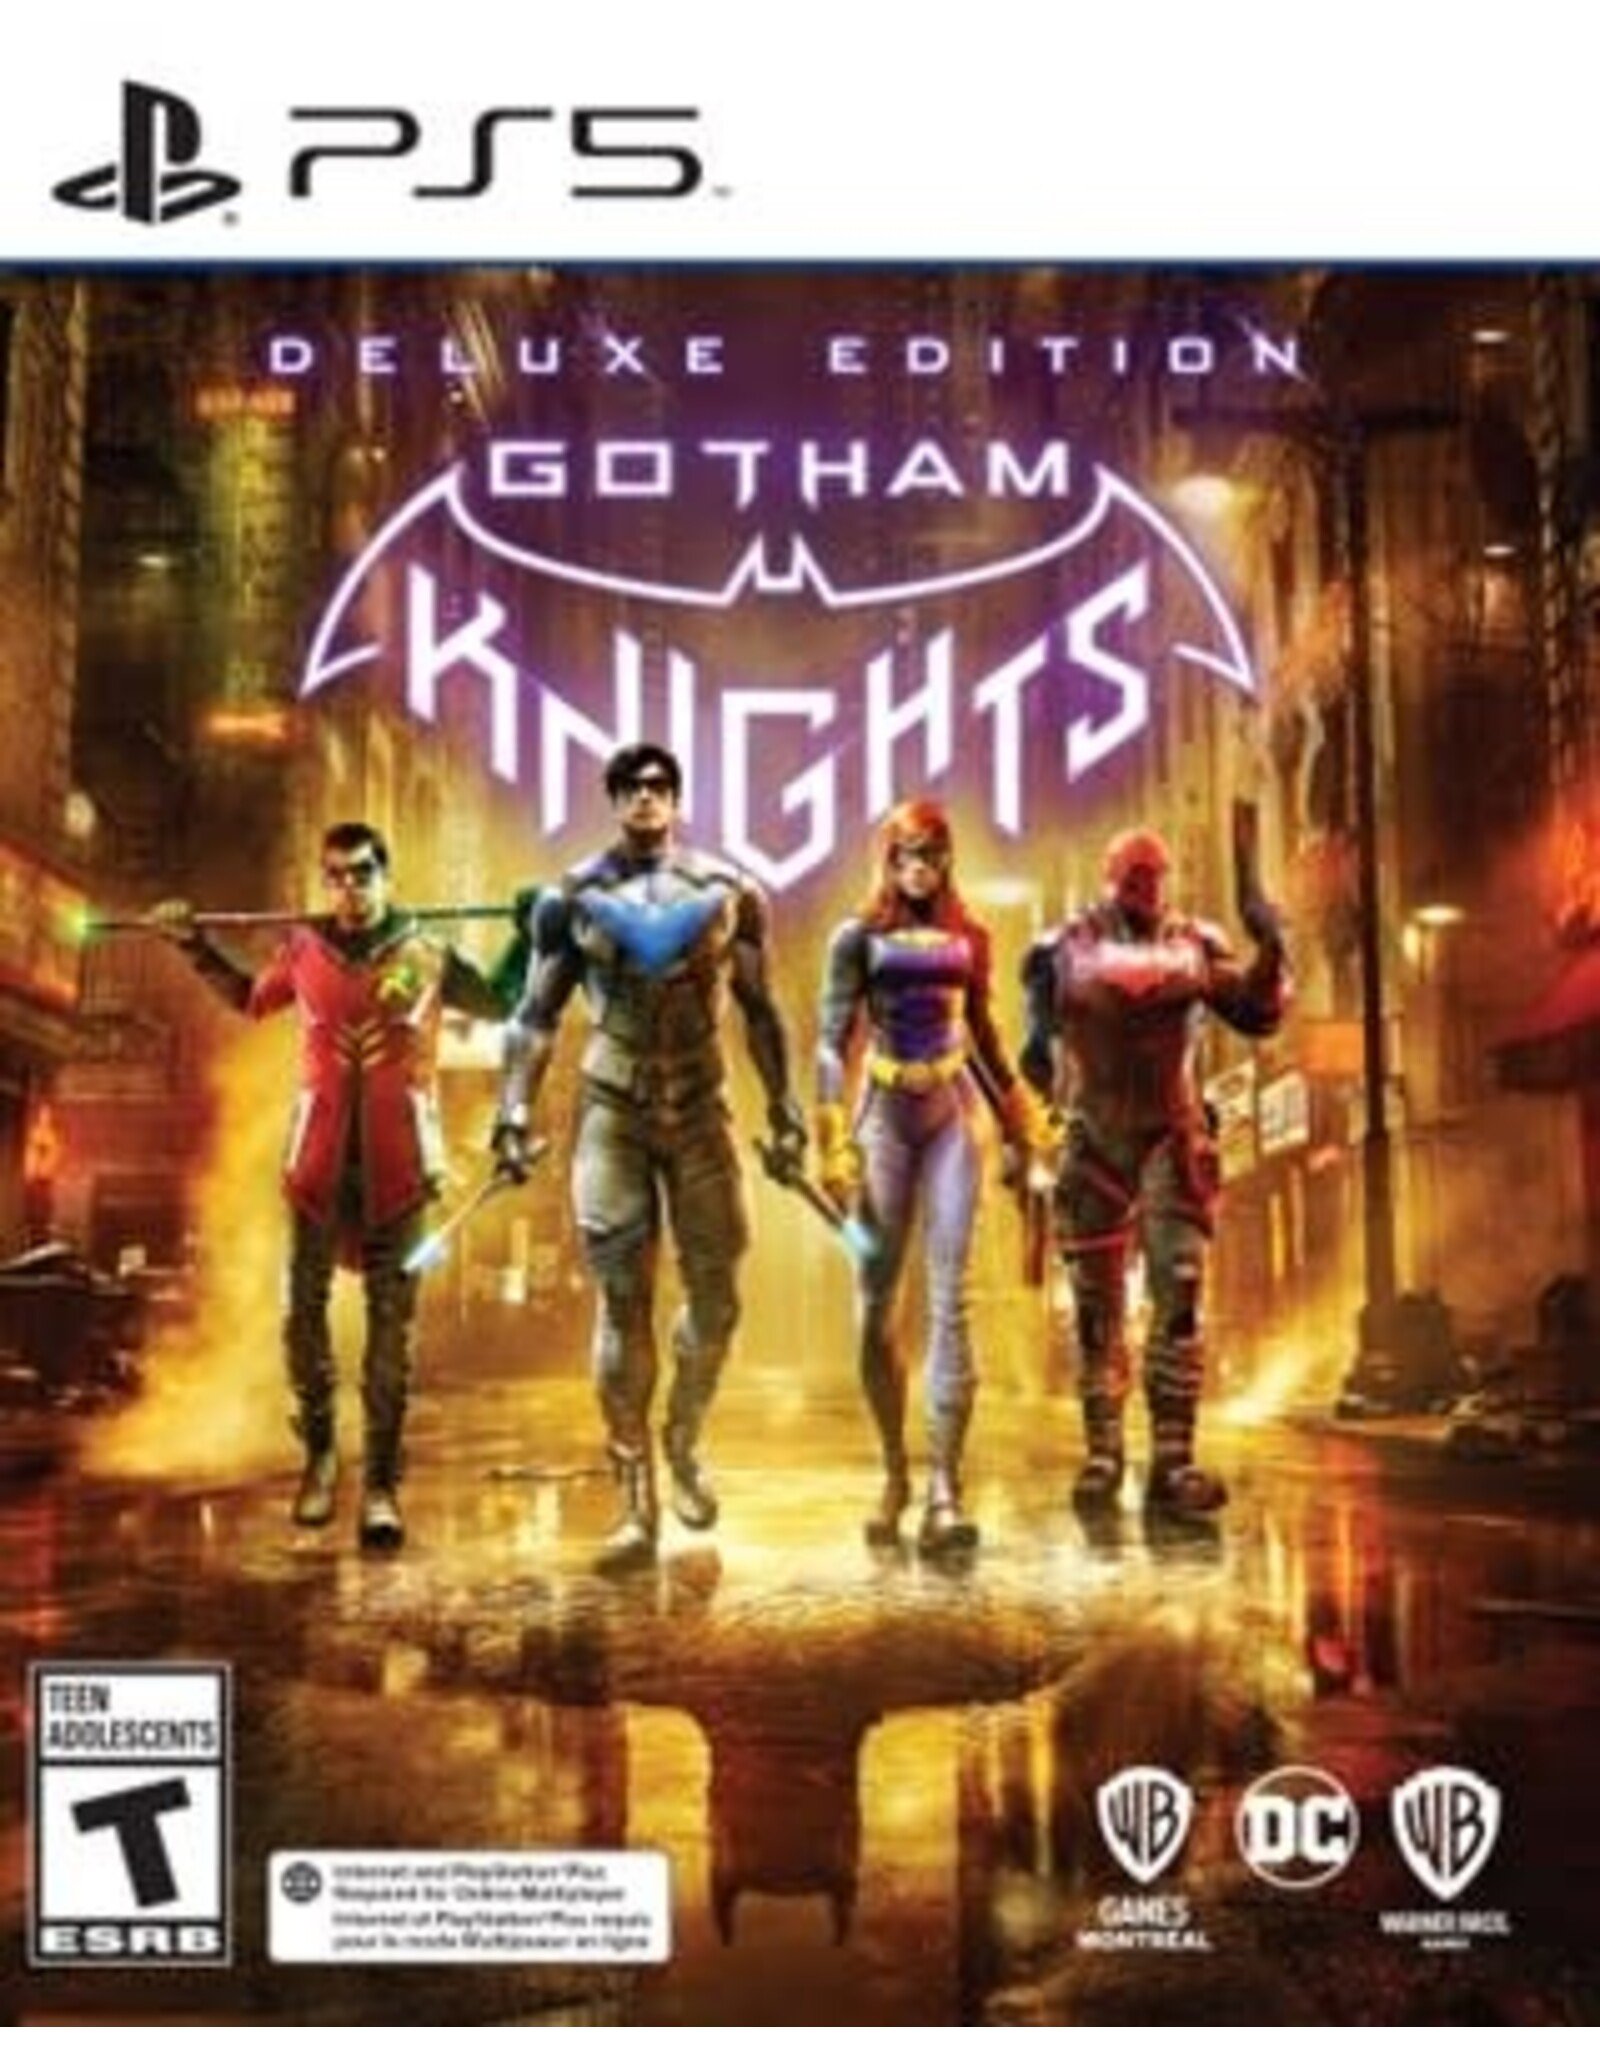 Playstation 5 Gotham Knights Deluxe Edition - NO DLC (Used)